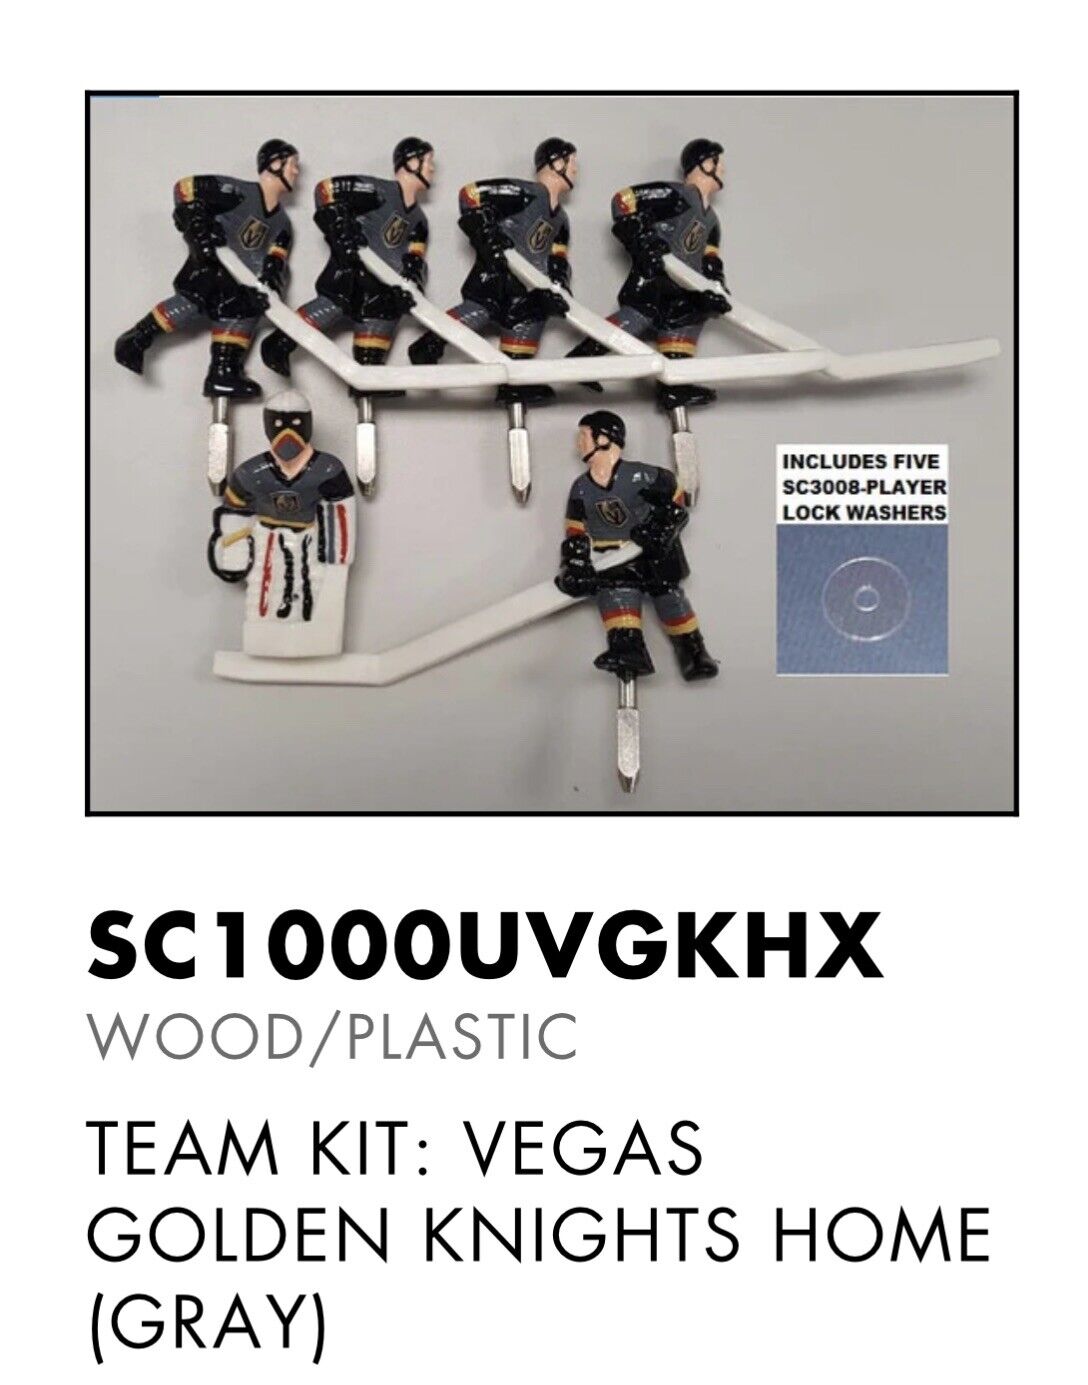 Super Chexx Bubble Hockey Vegas Golden Knights: New Players- hard to find